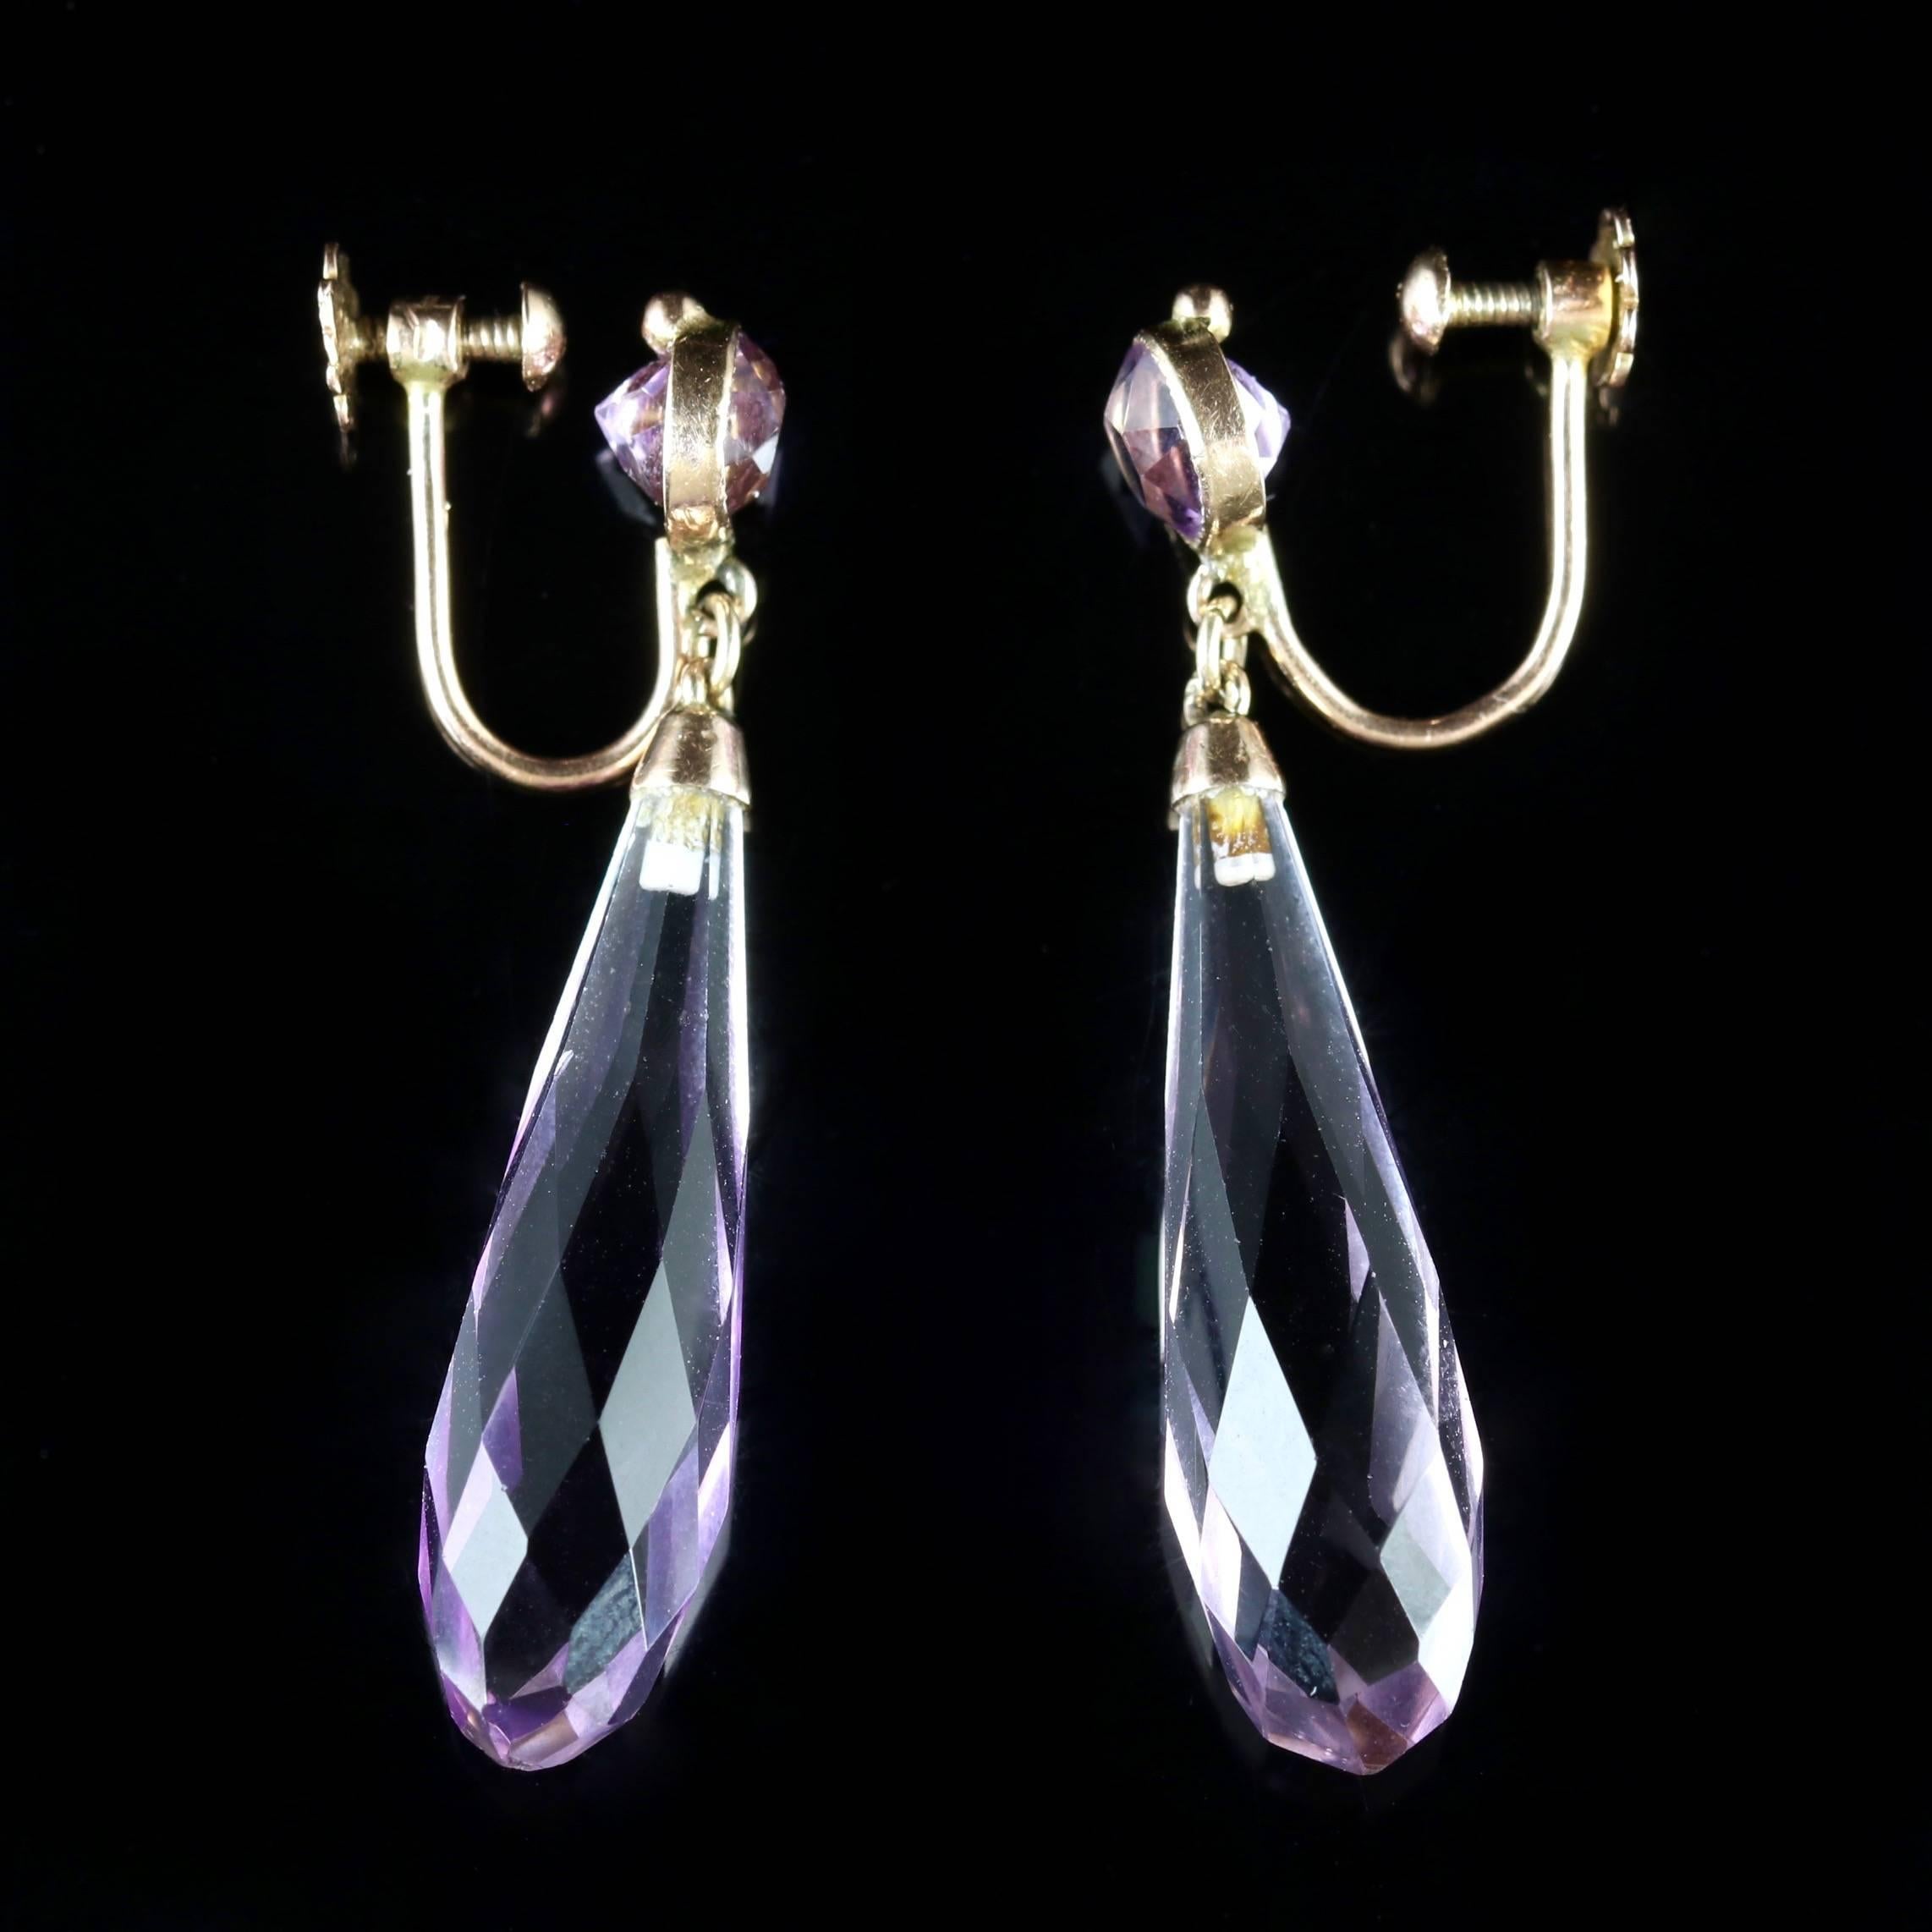 Antique Victorian Amethyst Earrings 9 Carat Gold Screw Back, circa 1900 For Sale 2